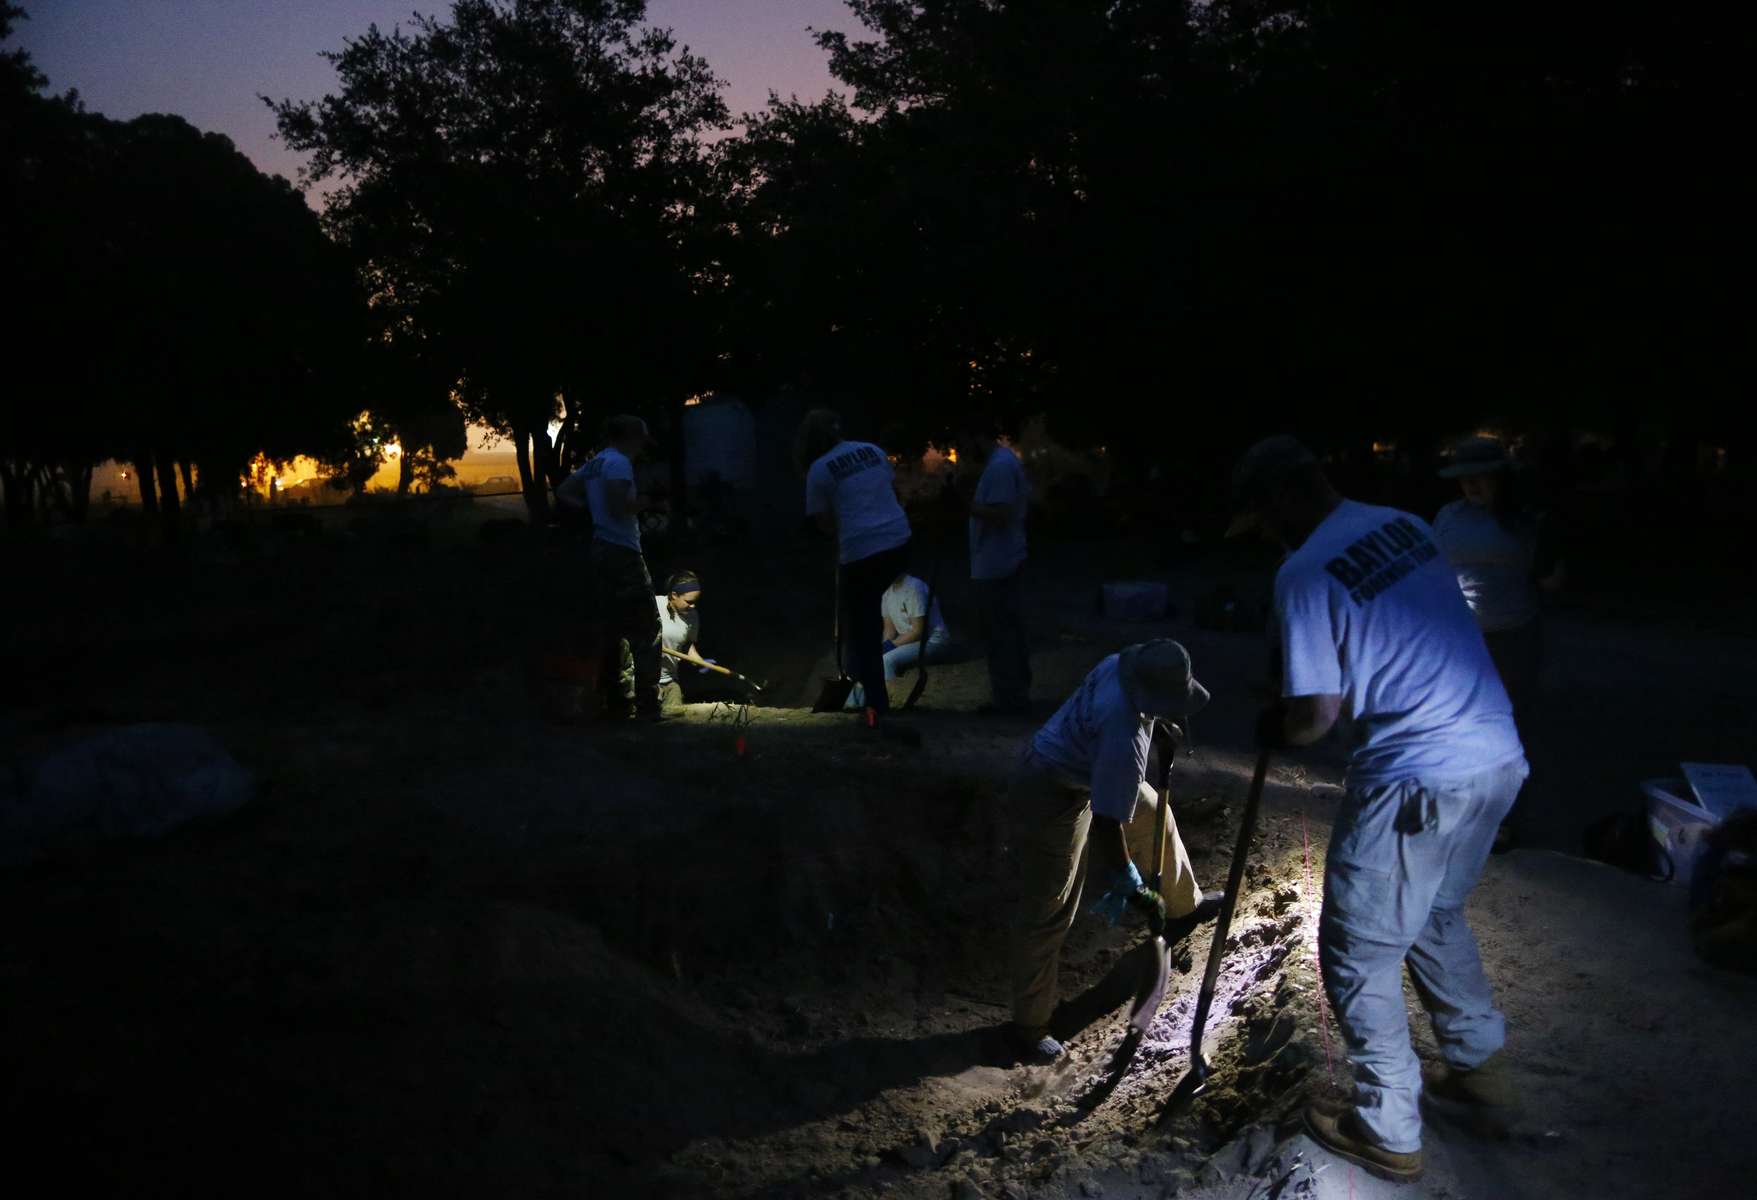 Falfurrias, Texas - Members of the Baylor forensics team and the University of Indianapolis Archeology and Forensics Laboratory shine flashlights so that their colleagues can start digging before the sun comes up as they work to exhume bodies of unidentified migrants who apparently died crossing the border and ended up buried anonymously in a pauper's grave in Falfurrias, Texas June 11, 2014. 